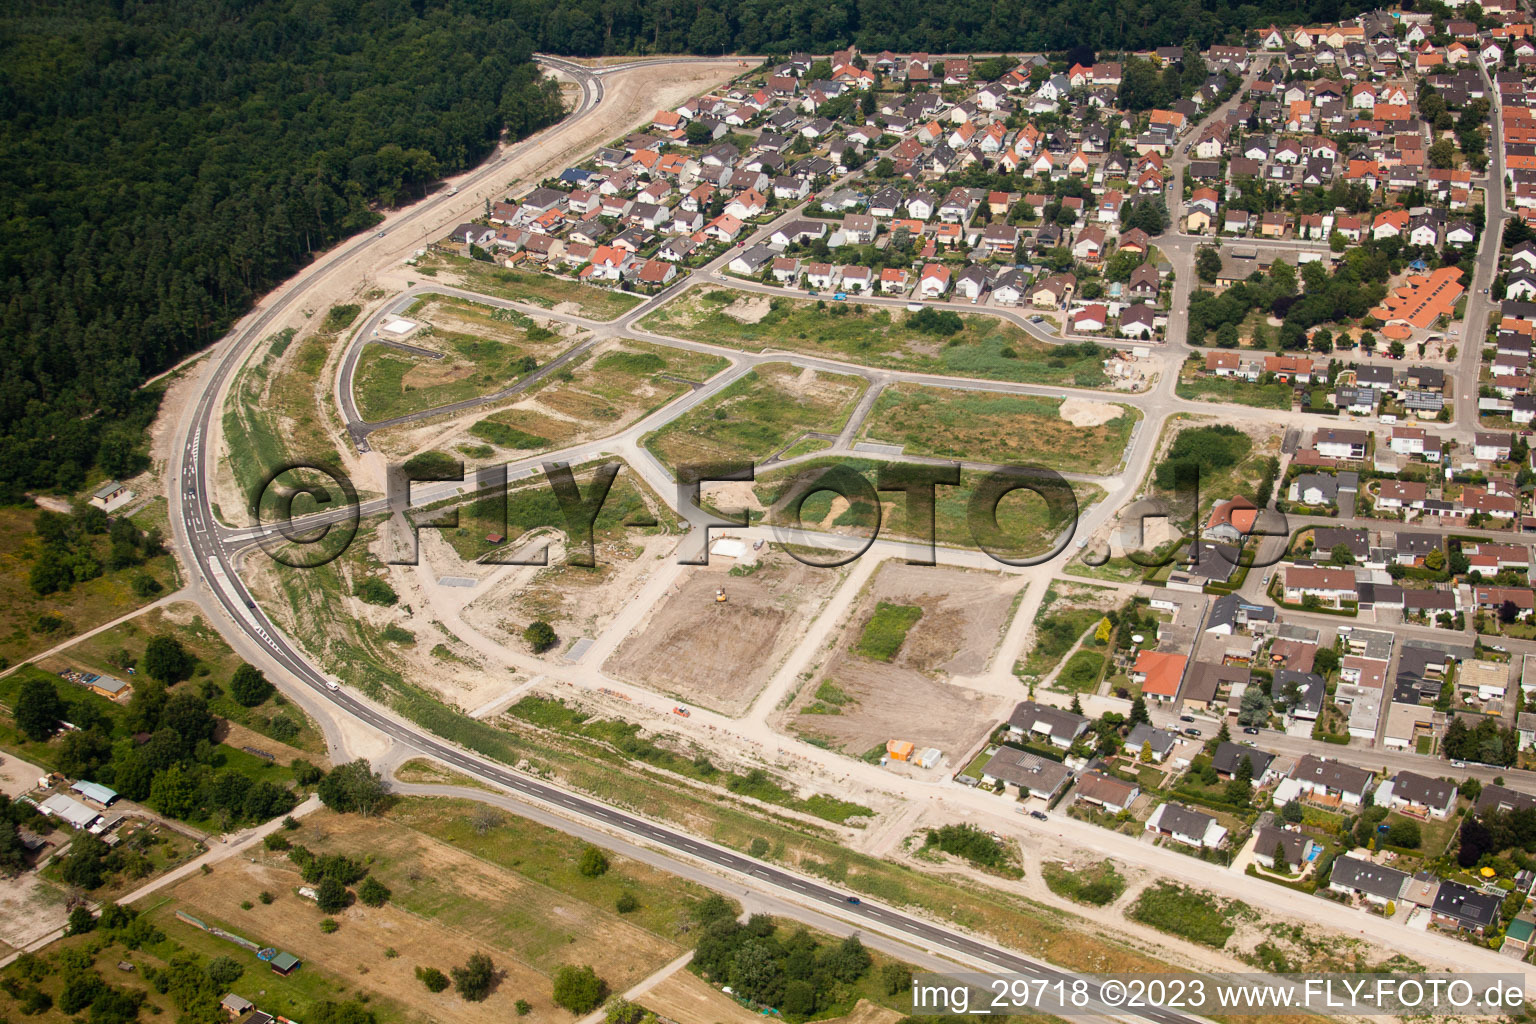 New development area west in Jockgrim in the state Rhineland-Palatinate, Germany from the drone perspective